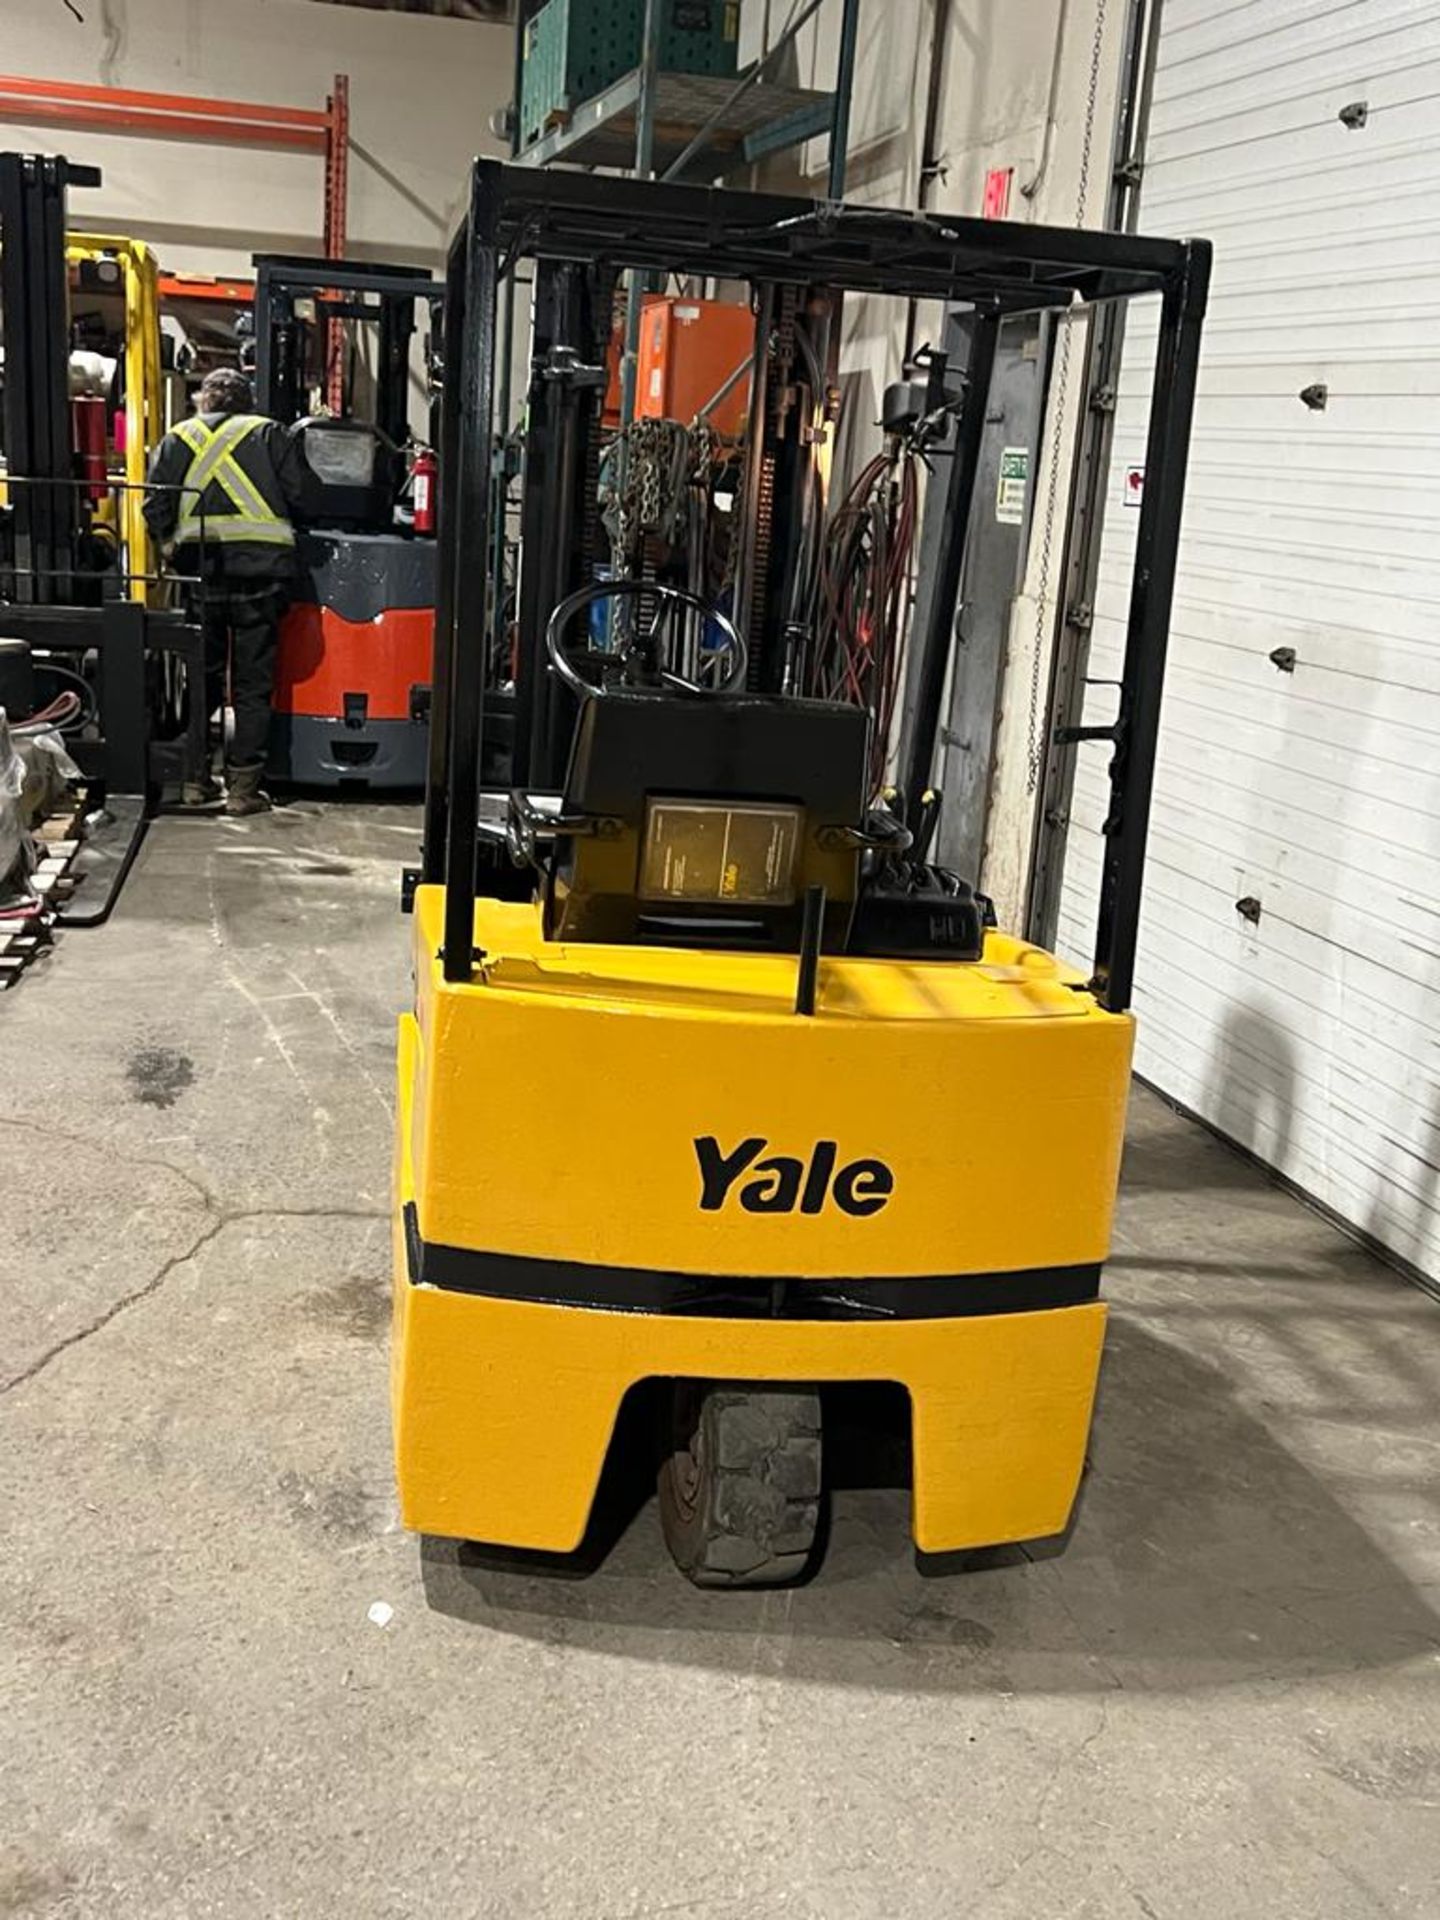 Yale 3,000lbs Capacity 3-Wheel Electric Forklift with sideshift and 3-STAGE MAST 36V - FREE CUSTOMS - Image 2 of 3